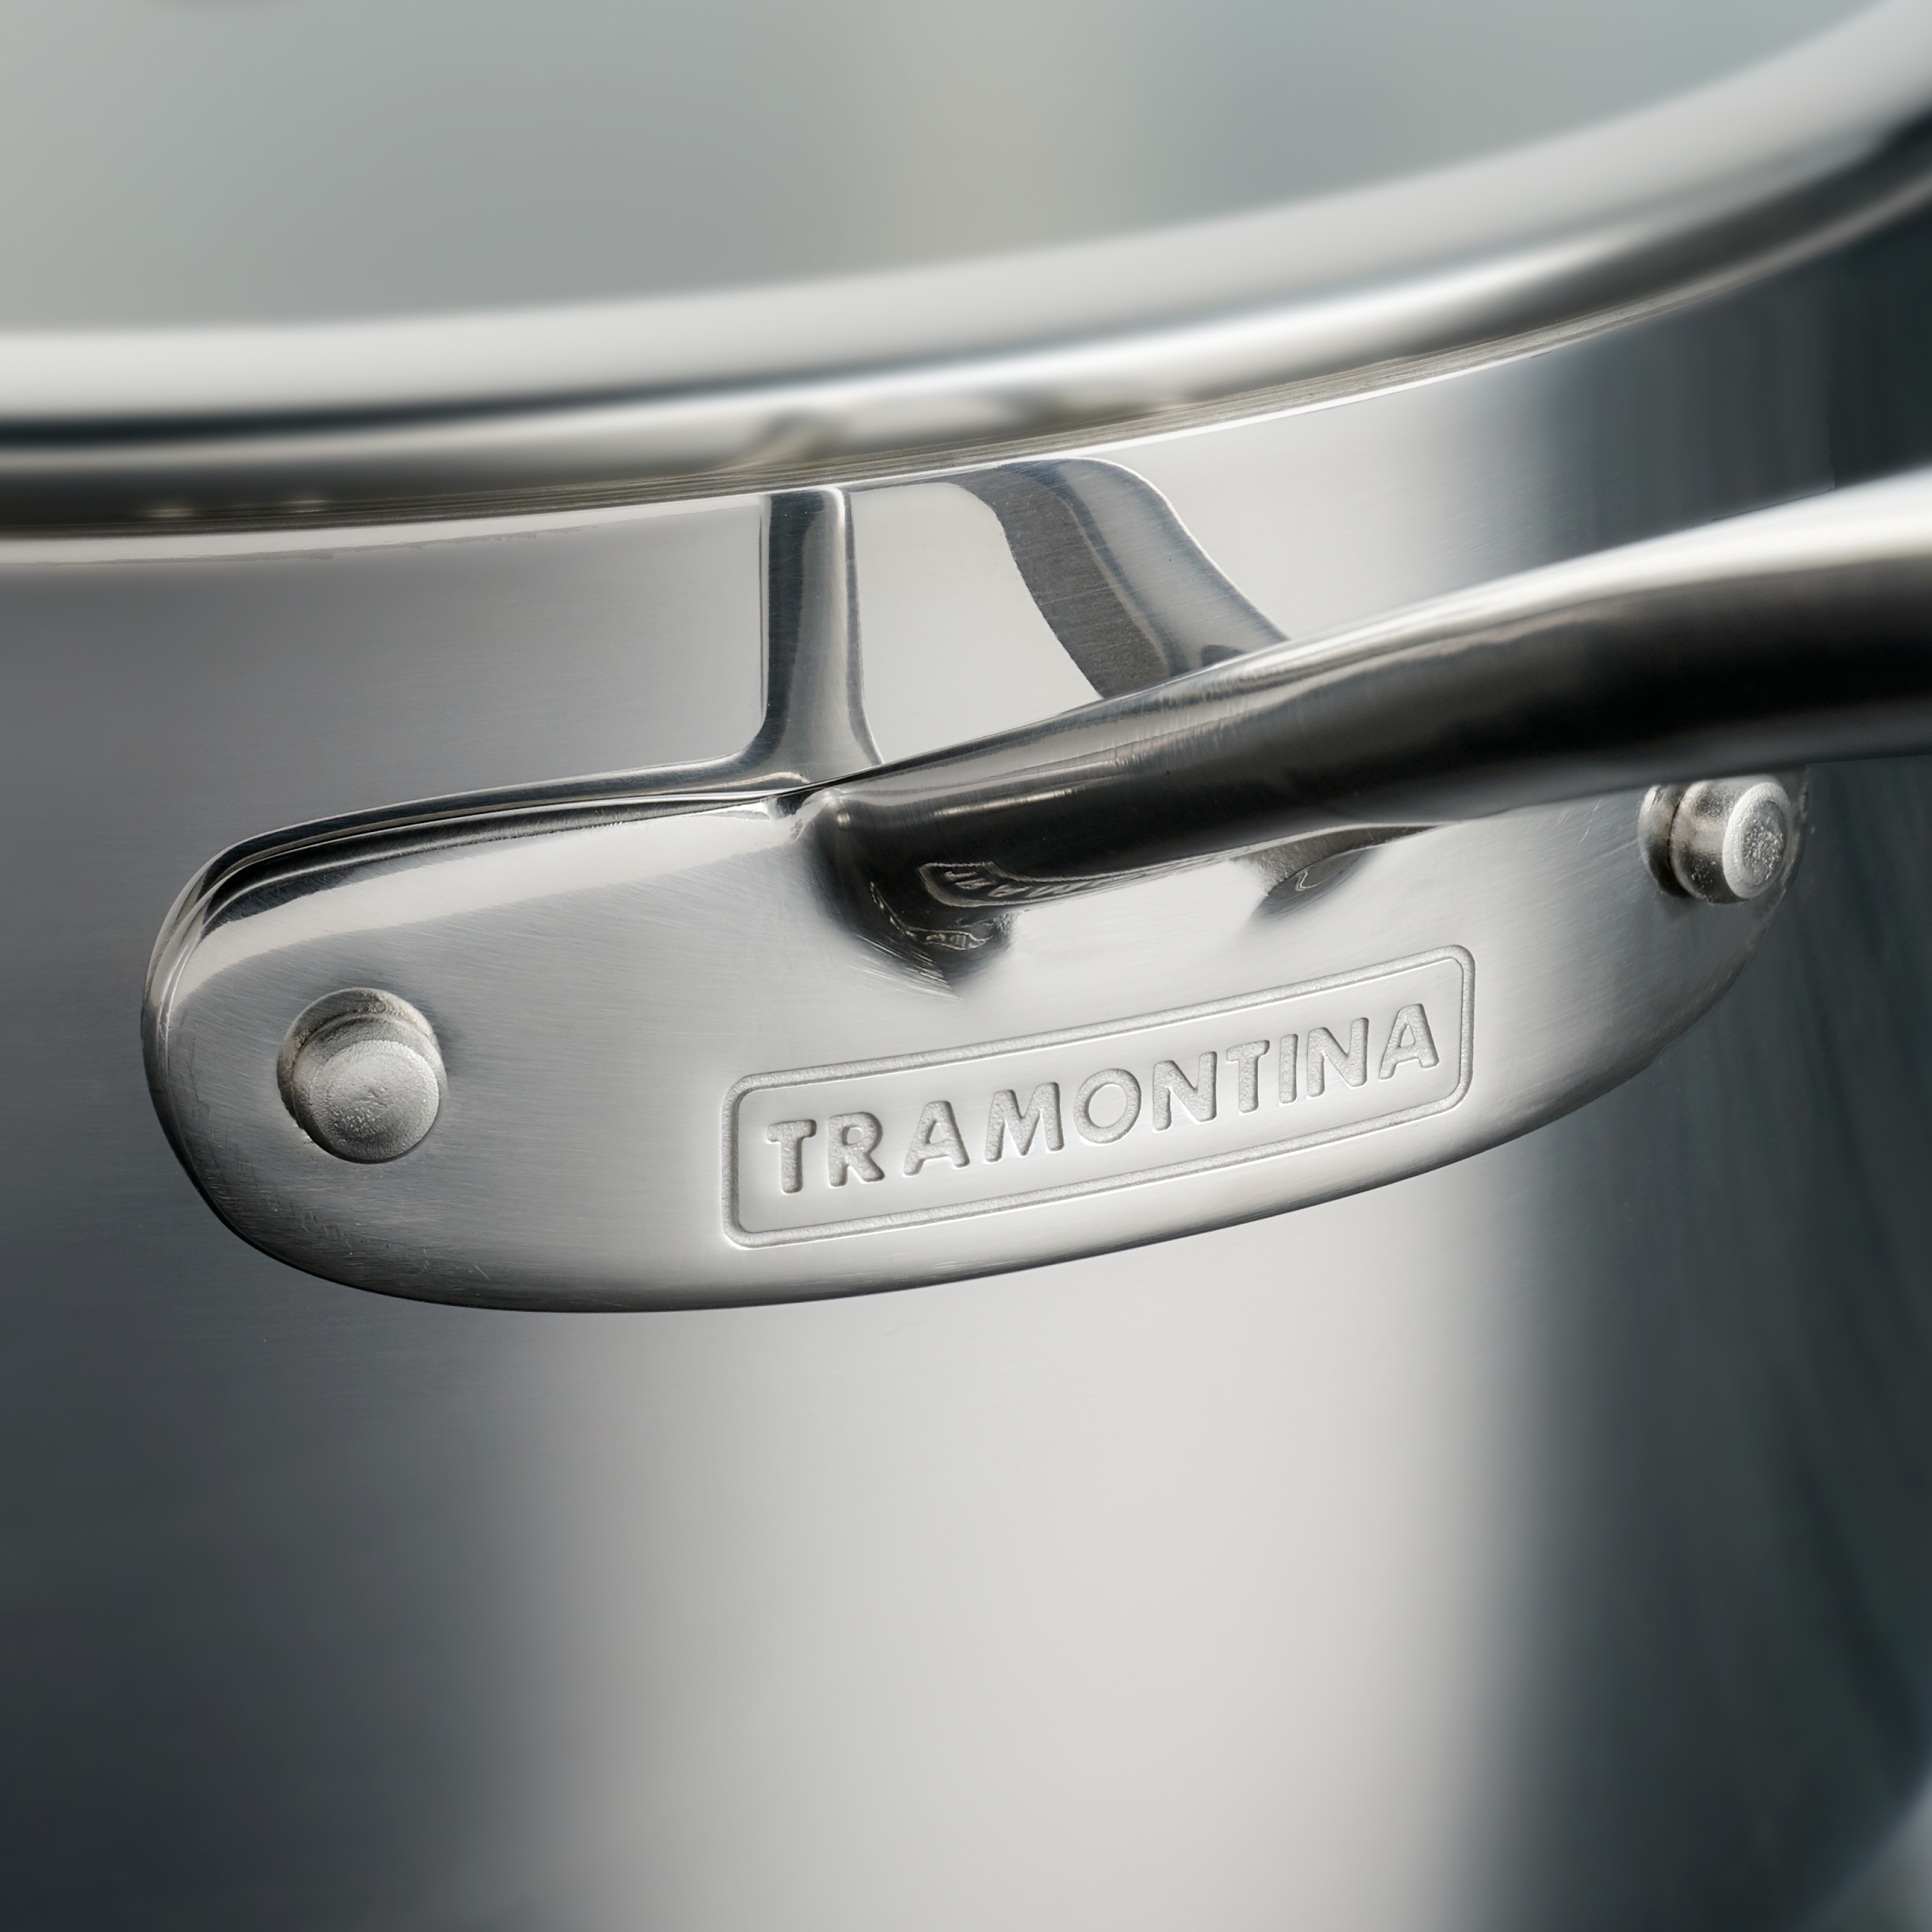 Tramontina 8 Pc Tri-Ply Clad Stainless Steel Cookware Set with Glass Lids - image 4 of 15